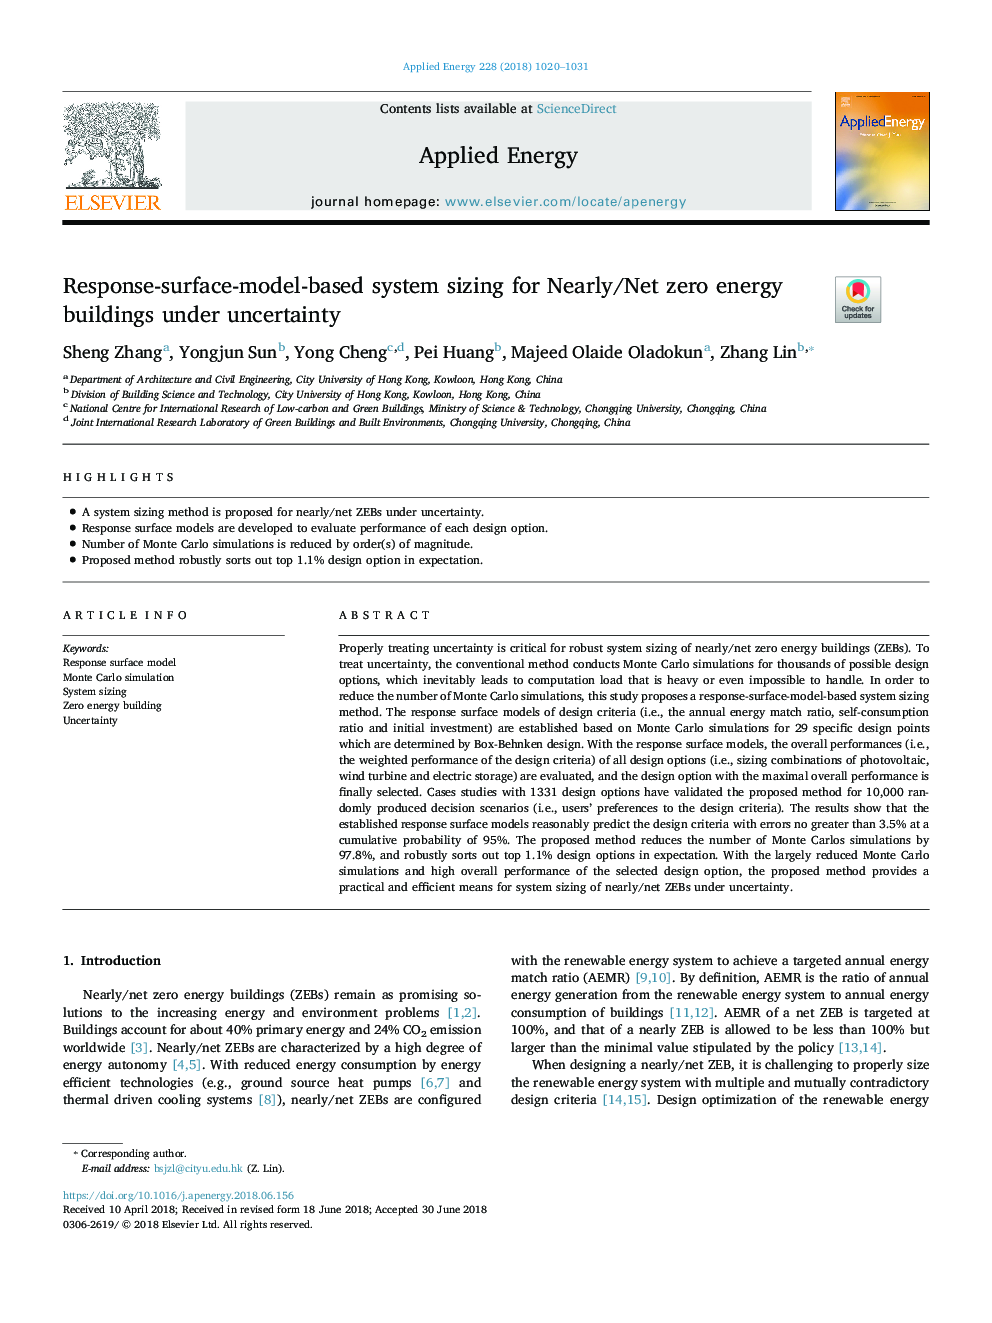 Response-surface-model-based system sizing for Nearly/Net zero energy buildings under uncertainty